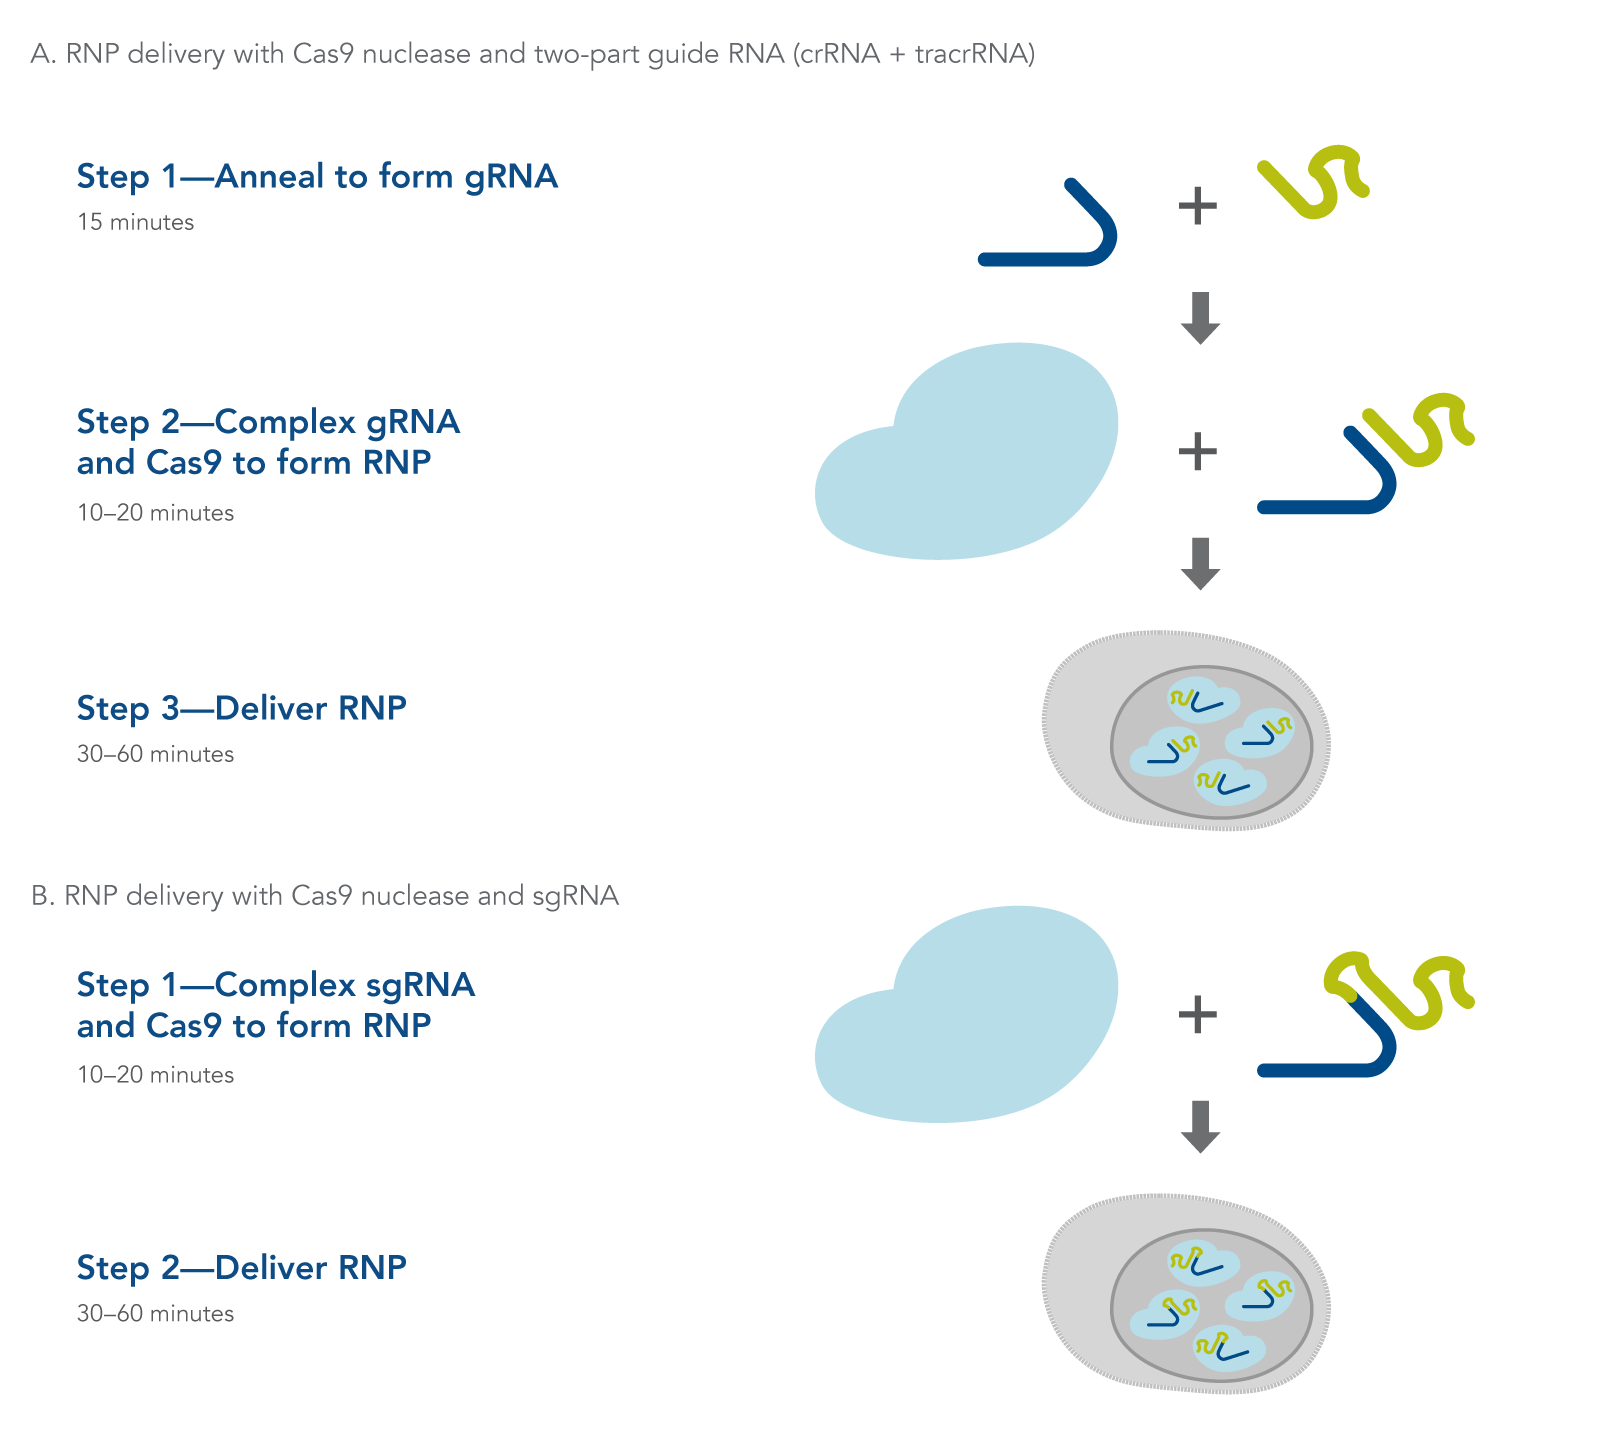 Transfection of ribonucleoprotein in CRISPR experiments (2-part gRNA and sgRNA)